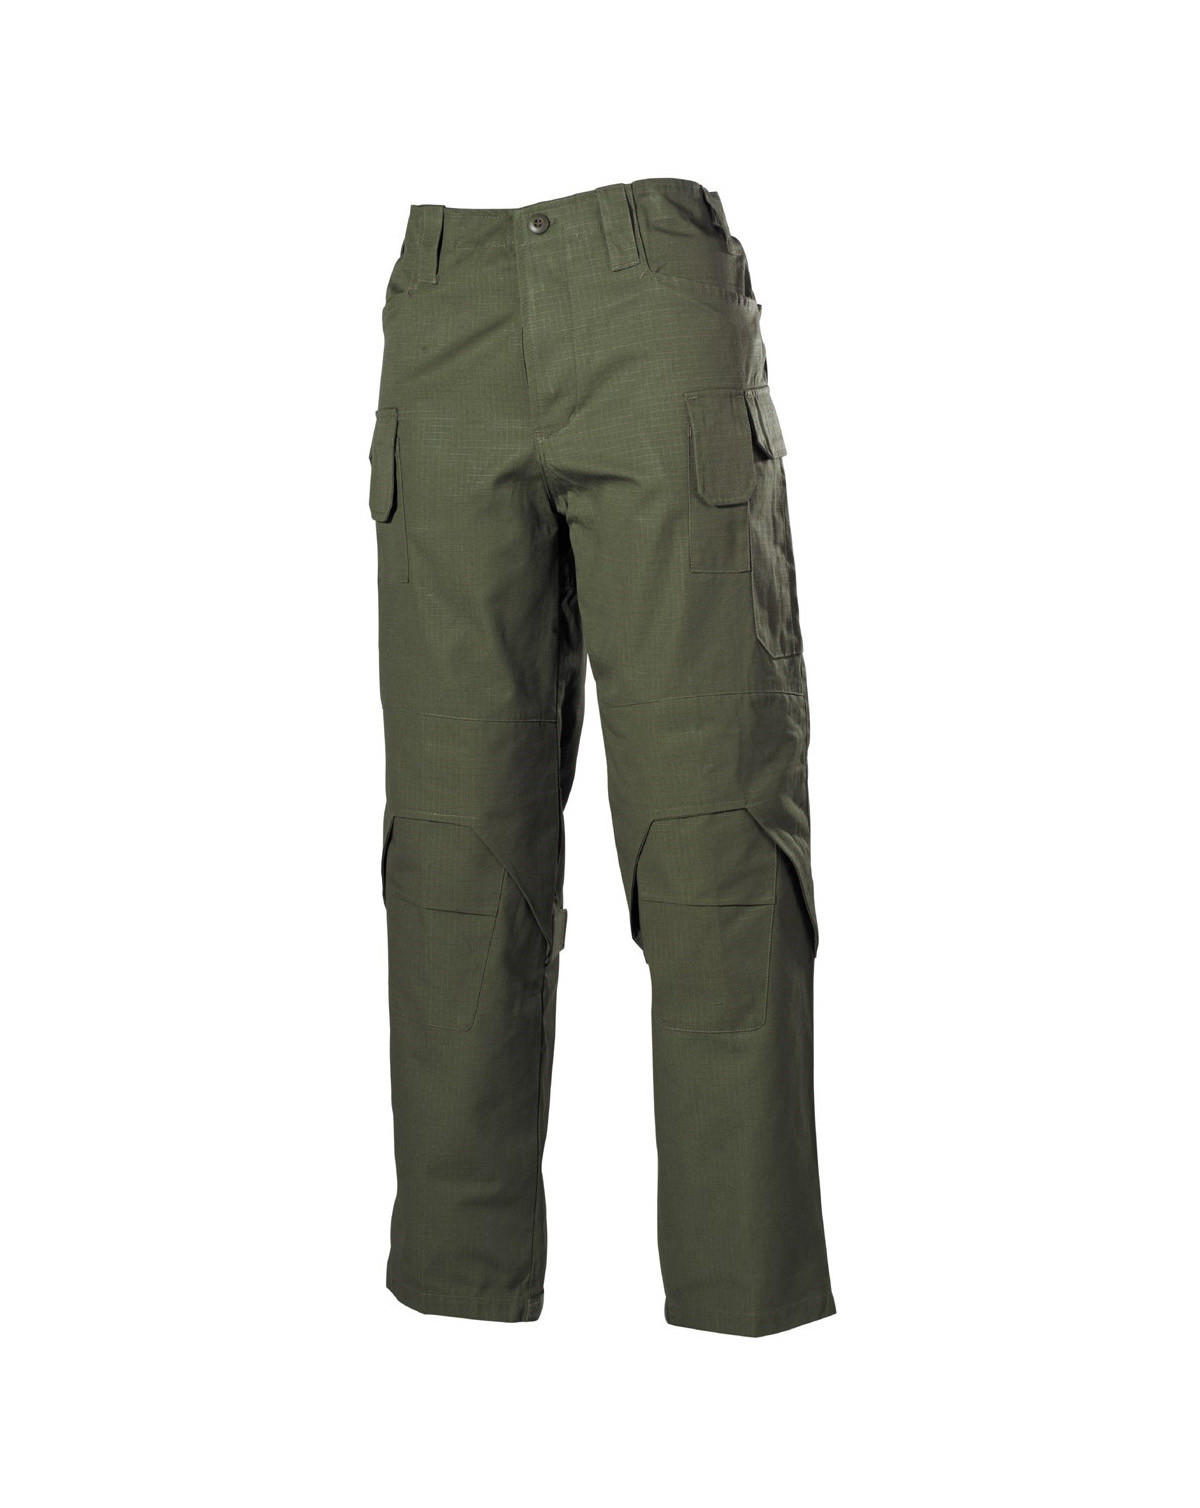 Buy MFH Tactical Mission Pants | Money Back Guarantee | ARMY STAR